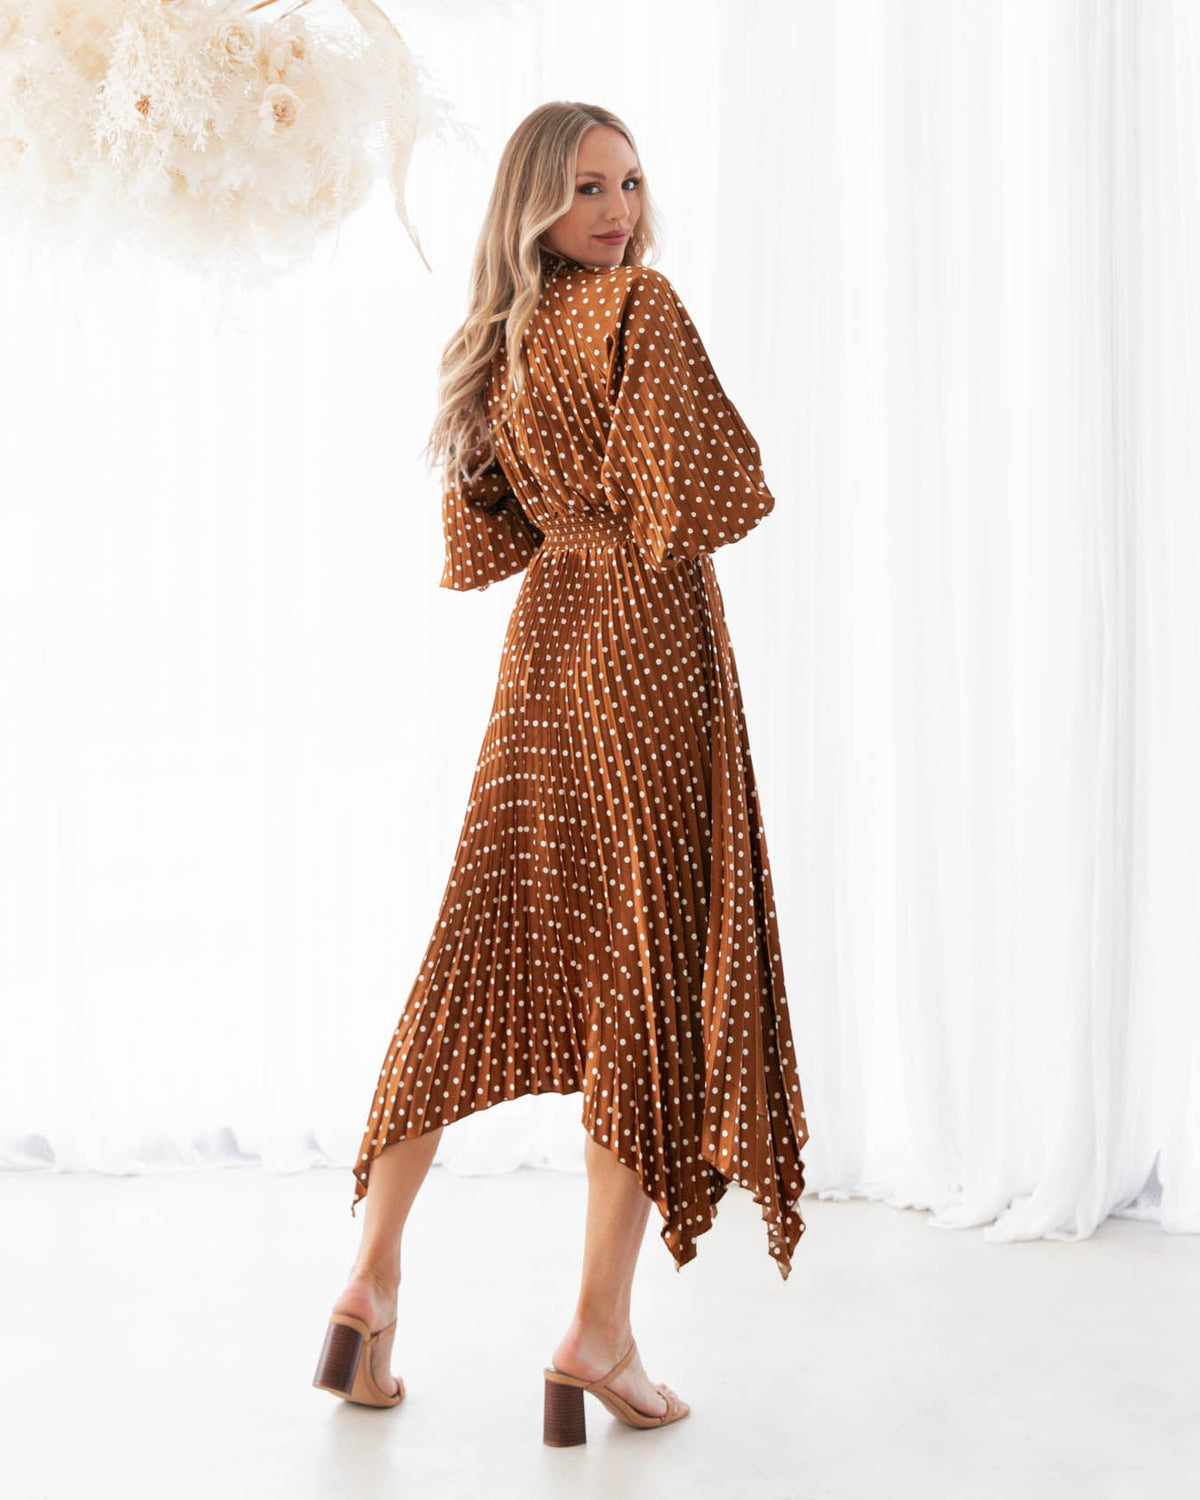 A model is wearing a rust polka dot pleated keyhole midi dress with balloon sleeves featuring elastic cuffs from the Ebby and I collection designed by Global Fashion House.